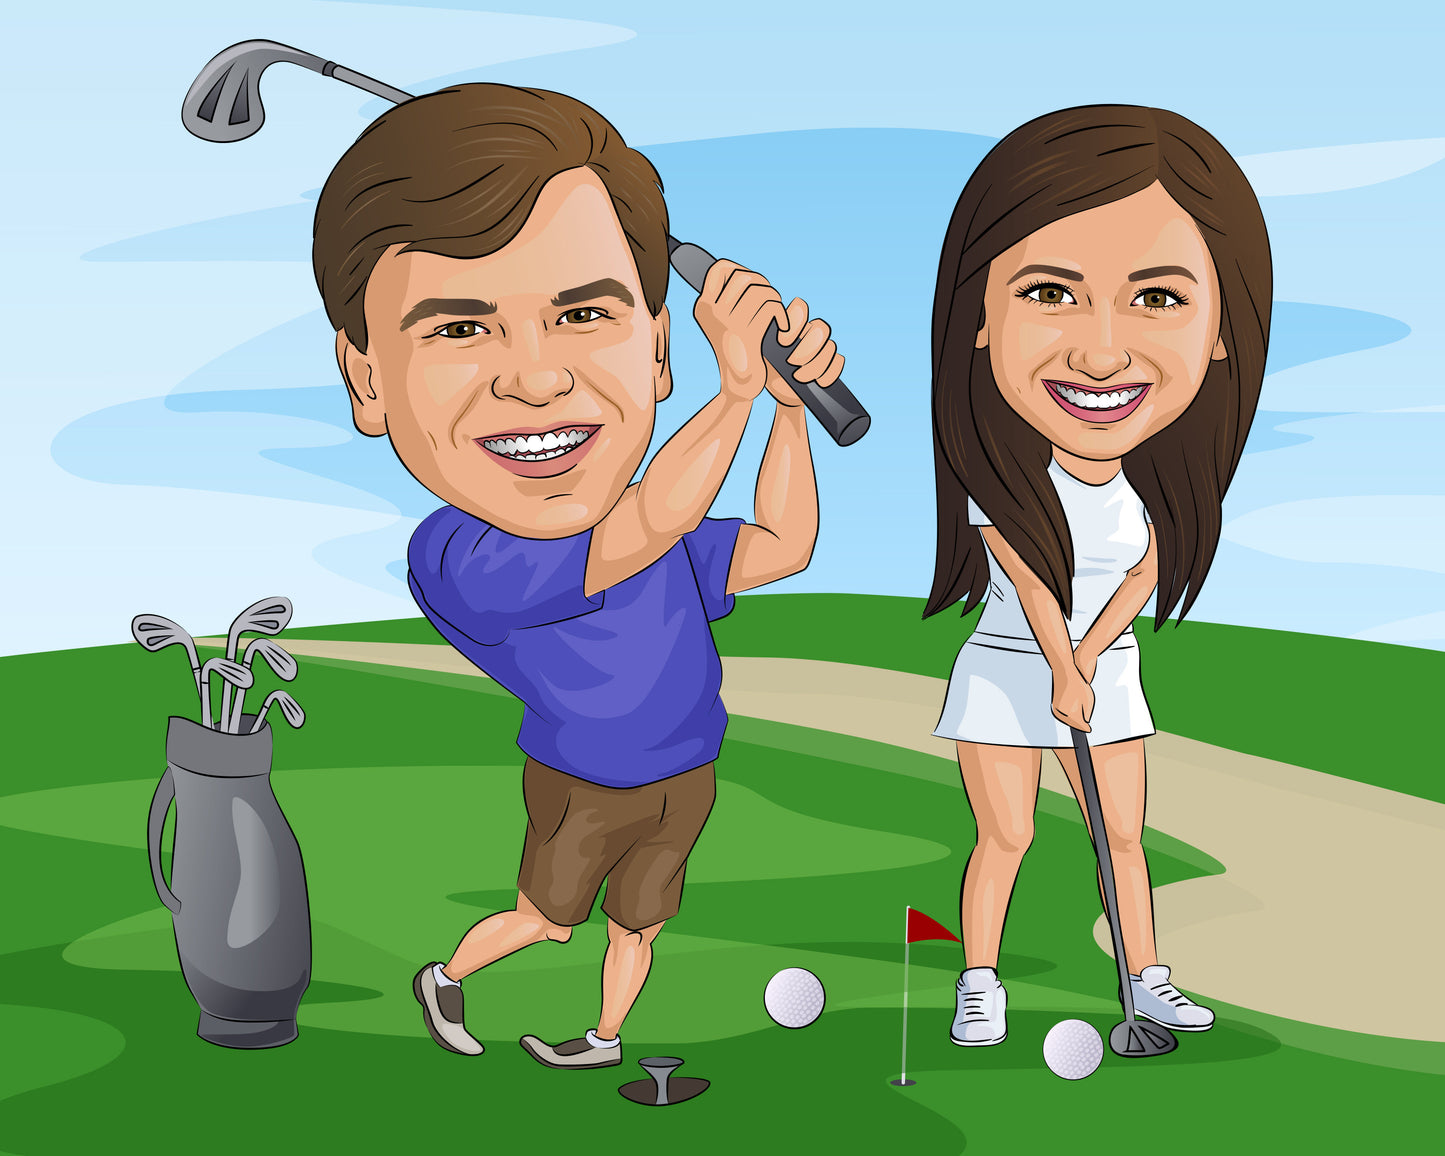 Golfer Gift - Custom Caricature Portrait From Your Photo/Golf Player Gift/Golf Cartoon